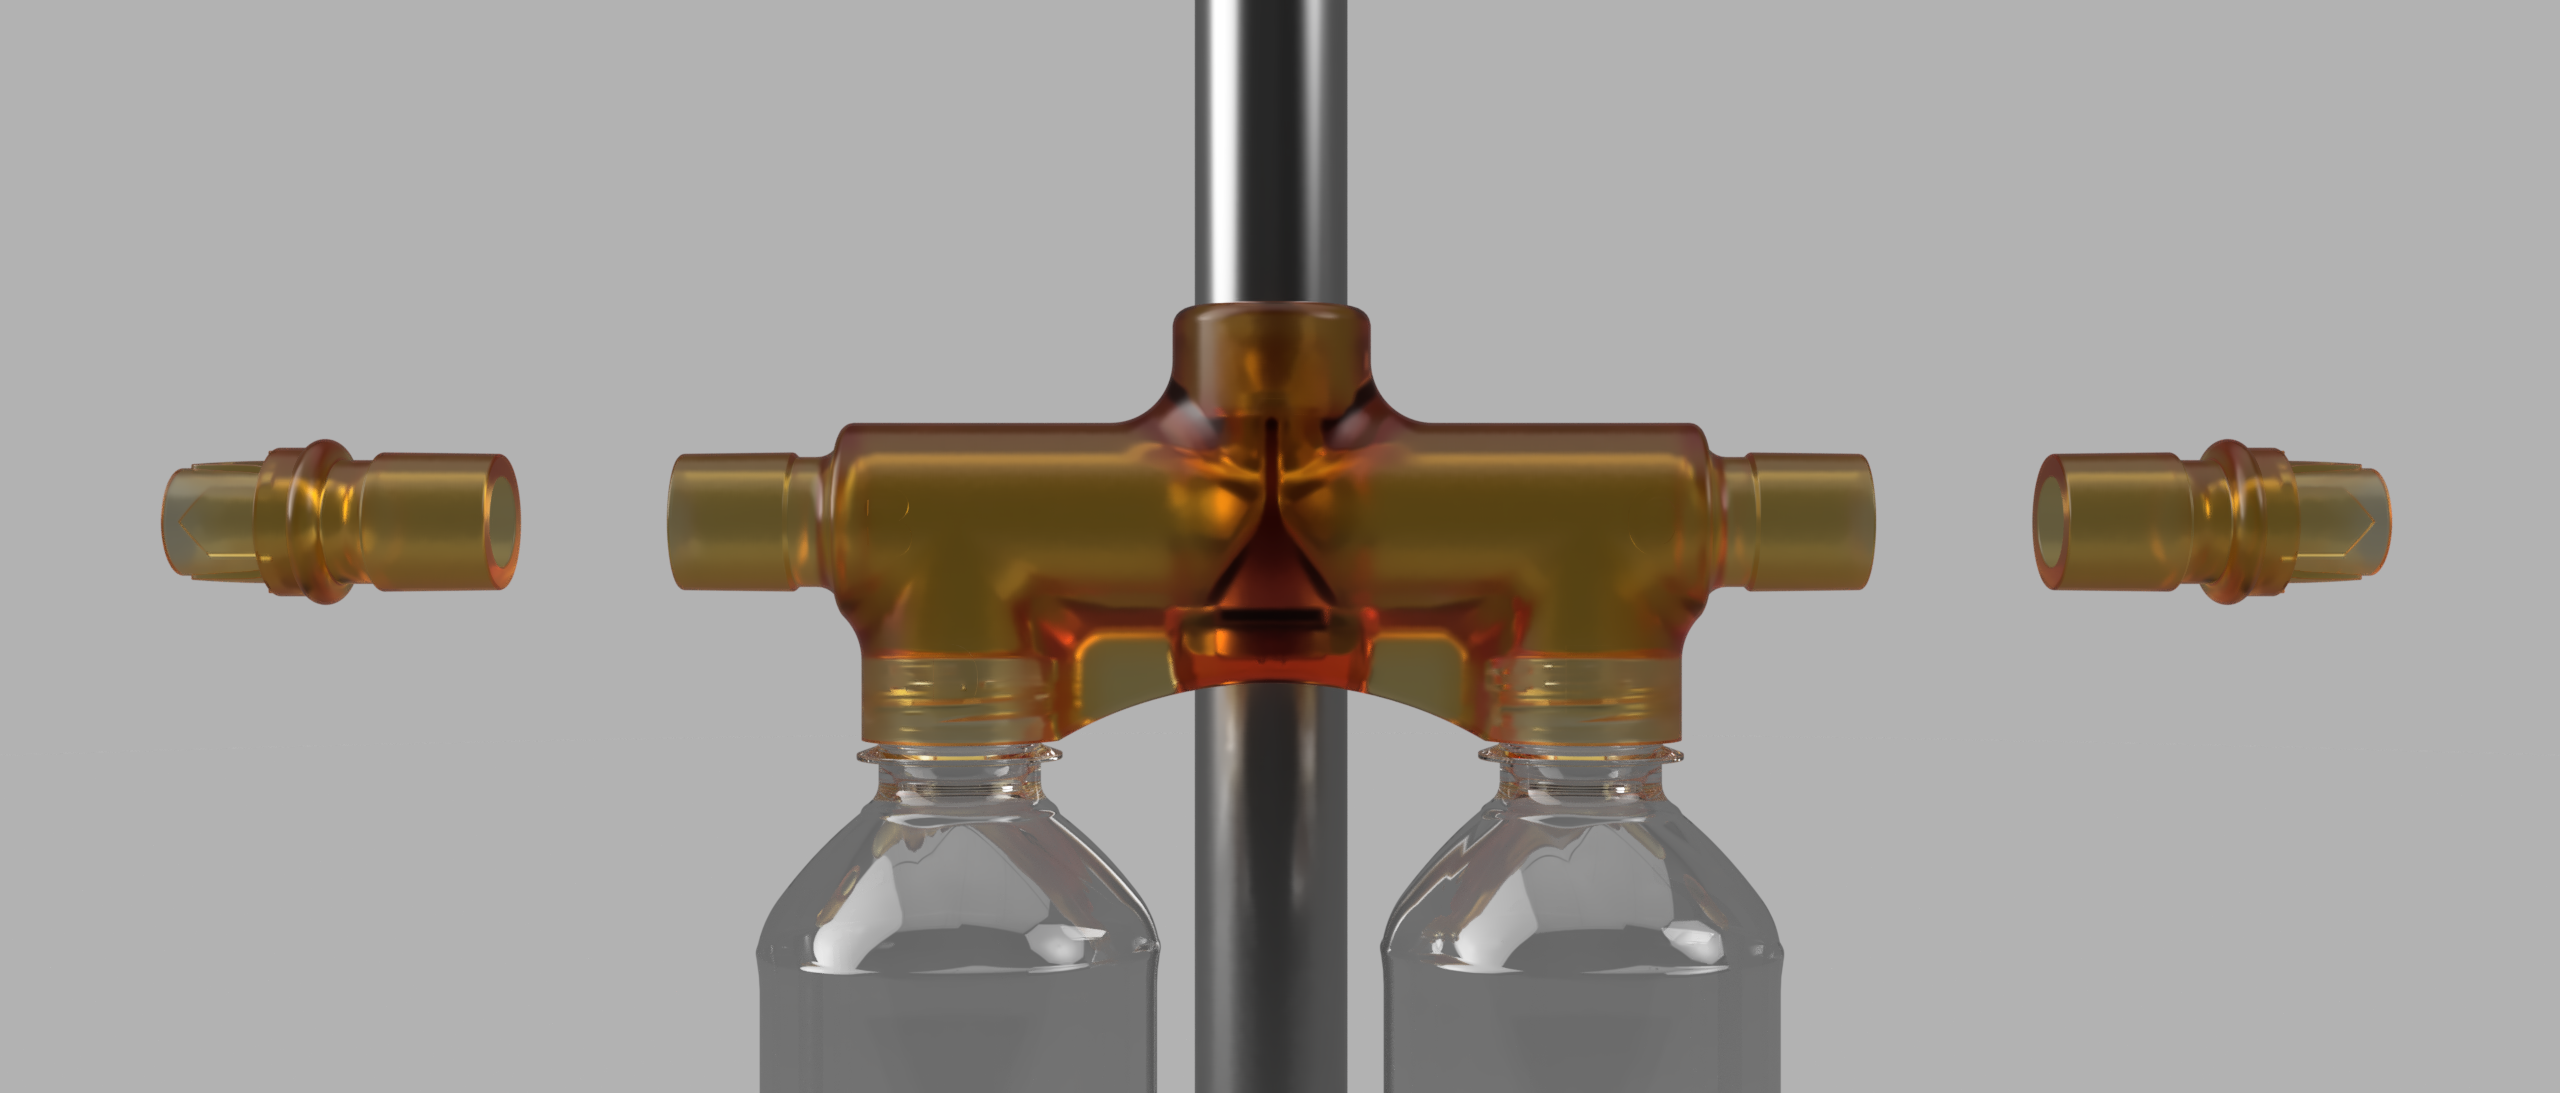 Render of T-Shaped Connector